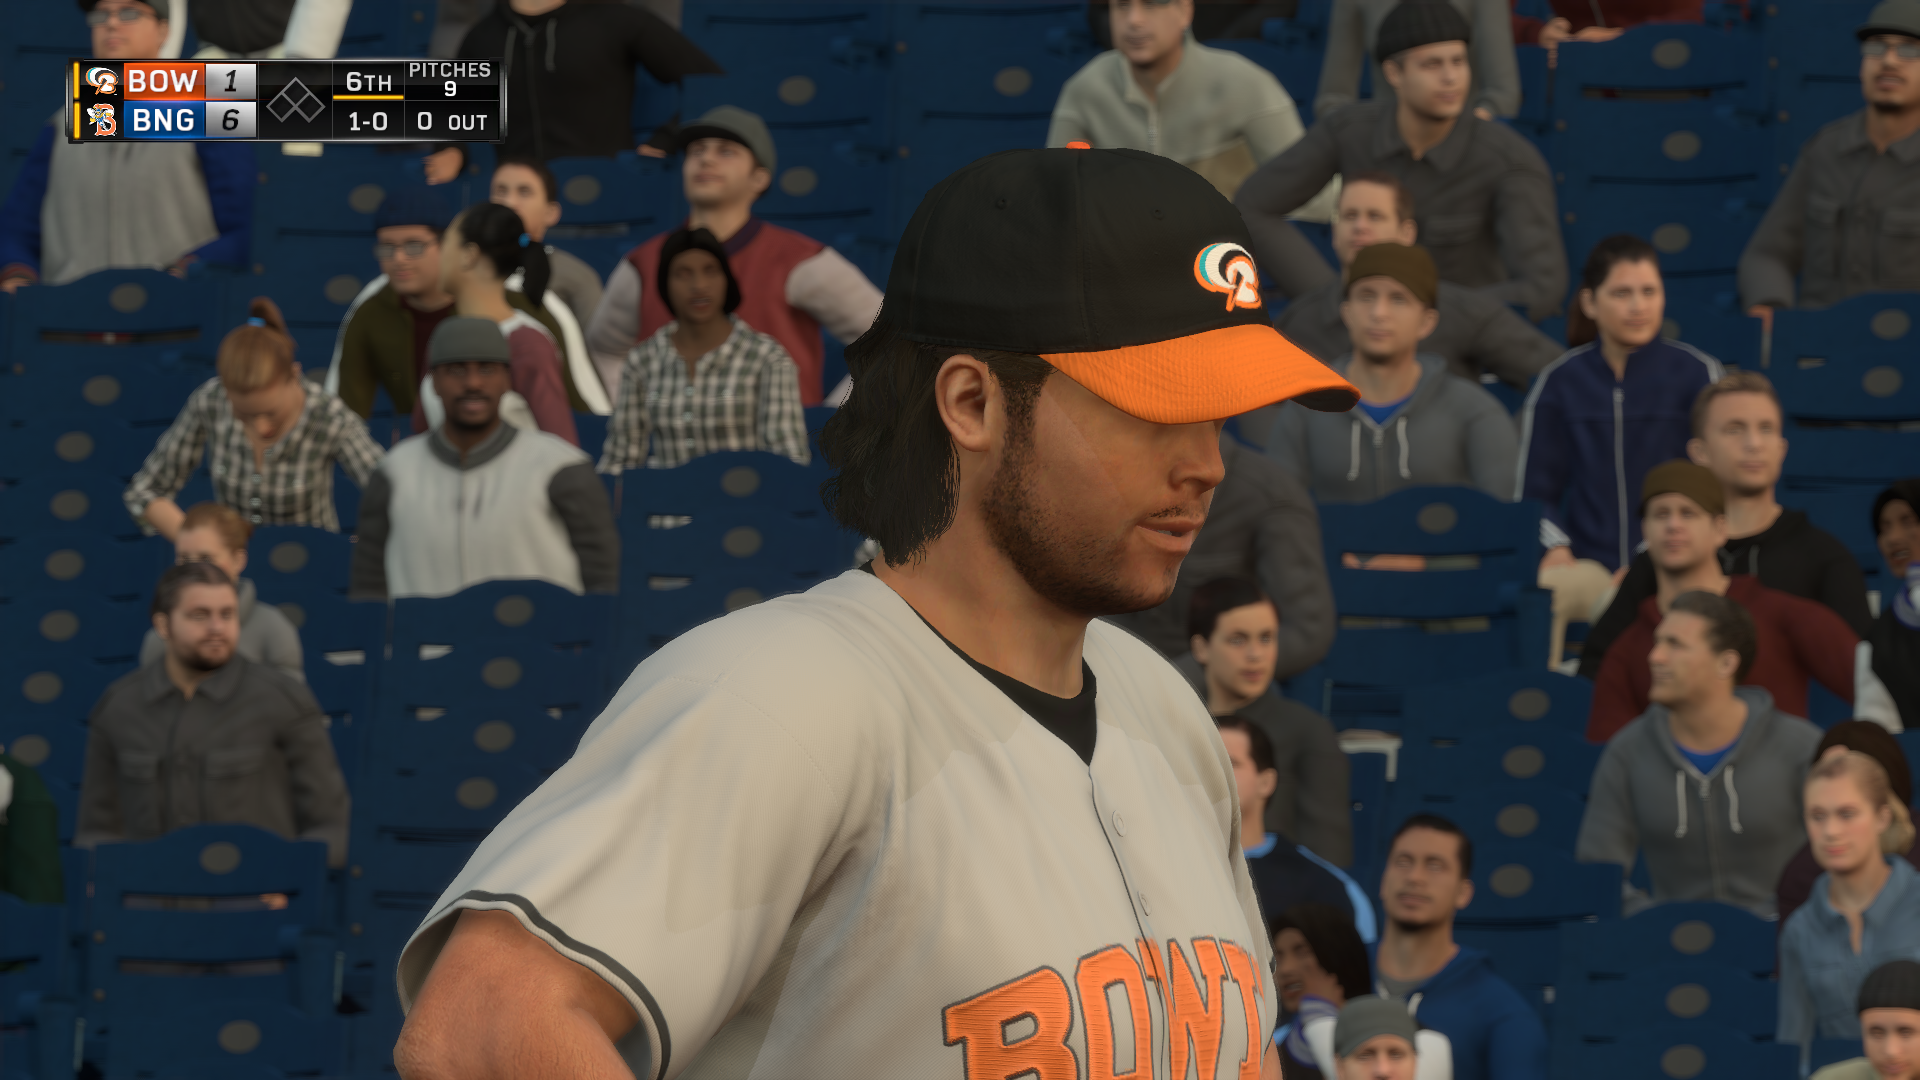 Mlb The Show 16 Review 33